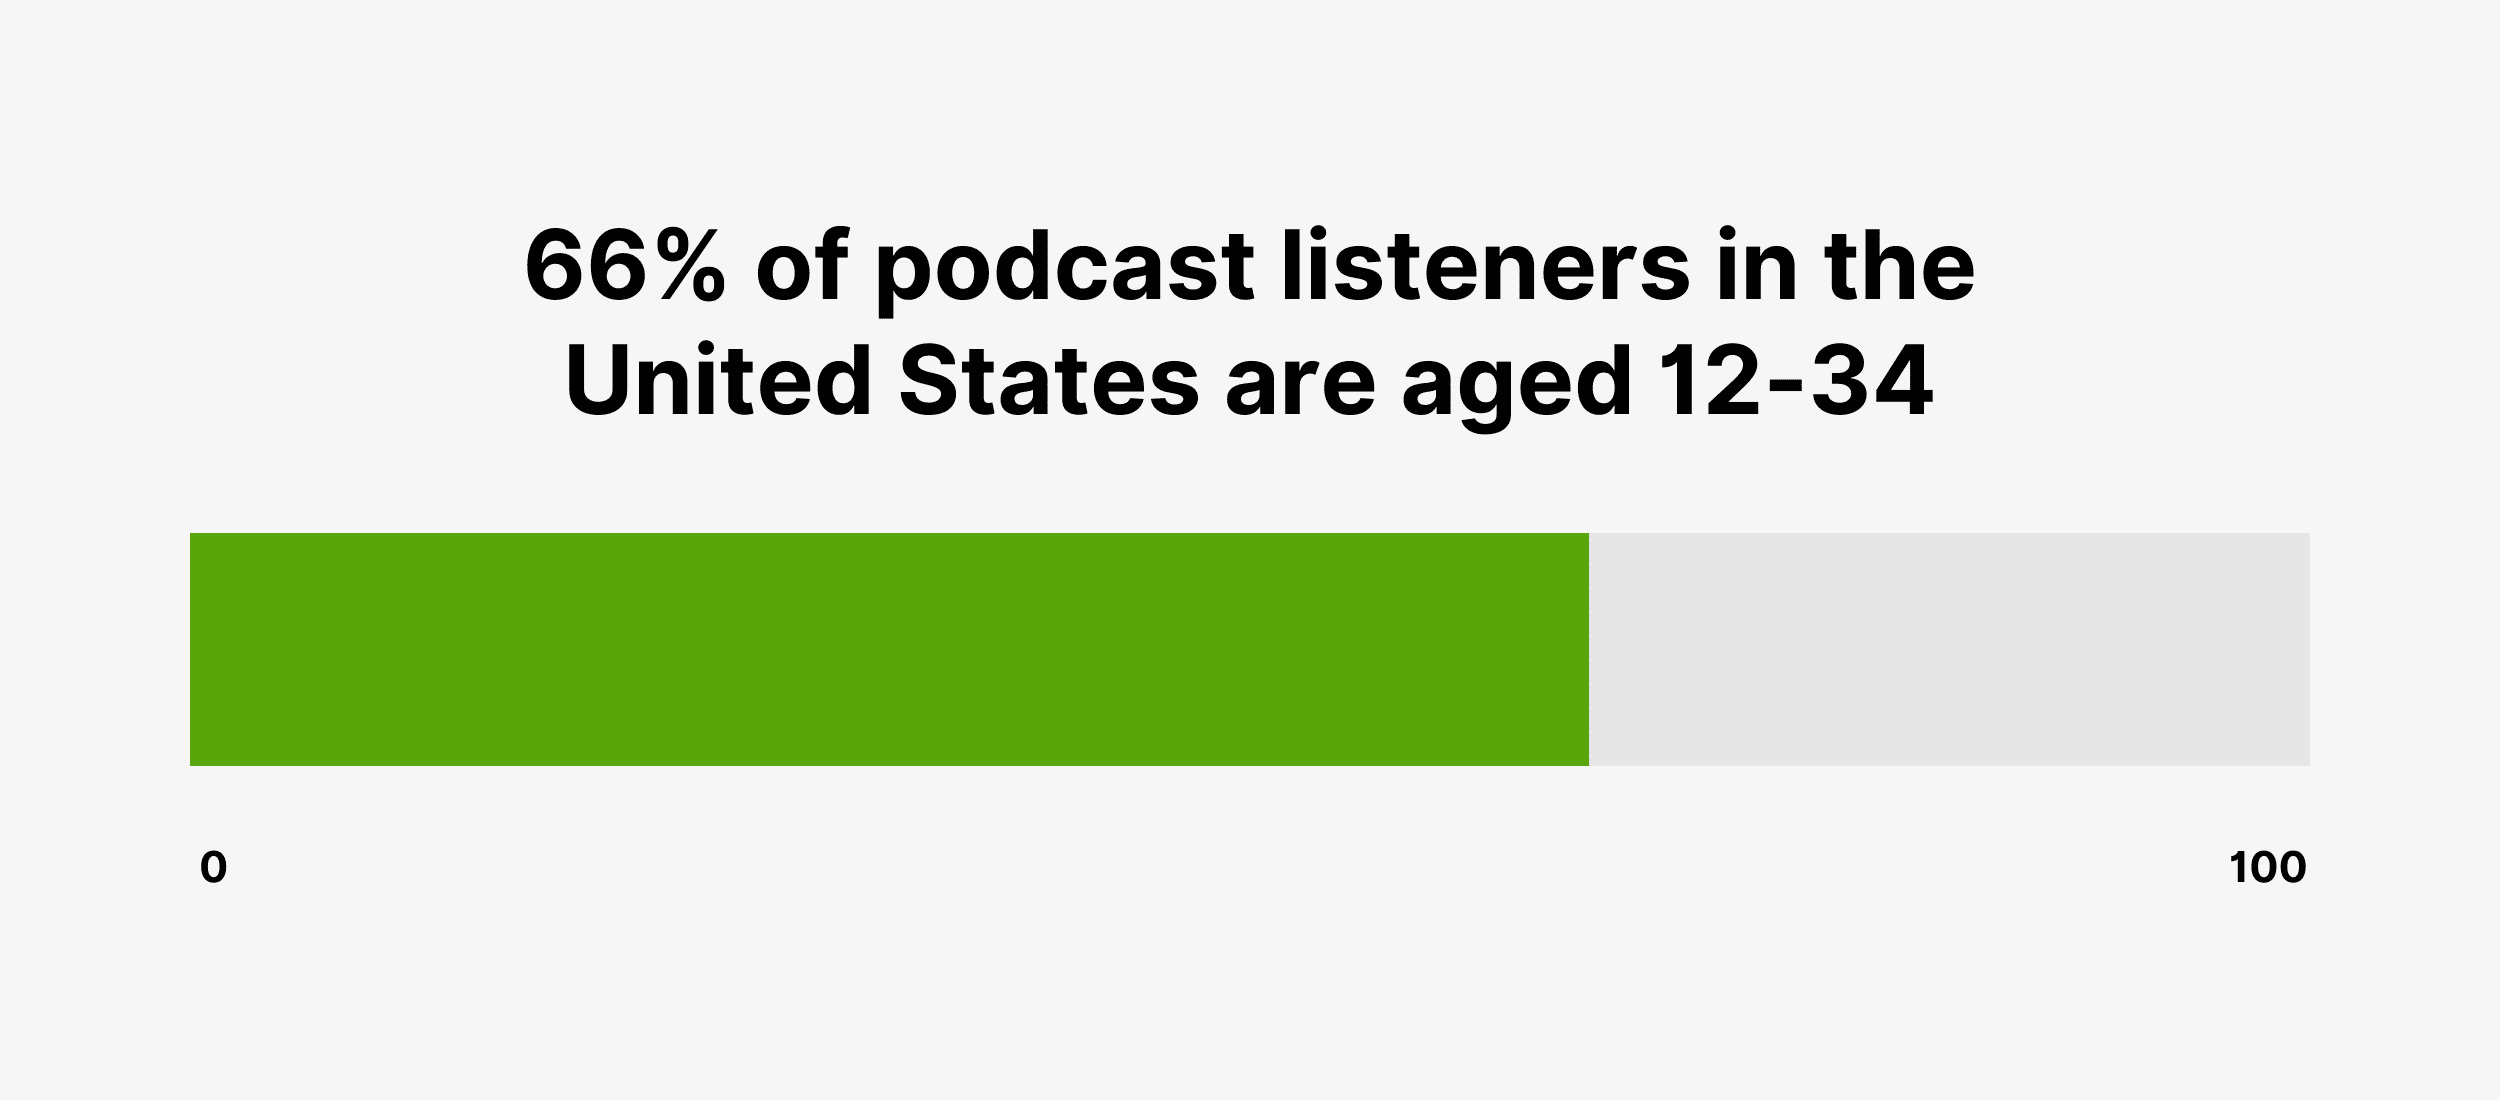 66% of podcast listeners in the United States are aged 12-34